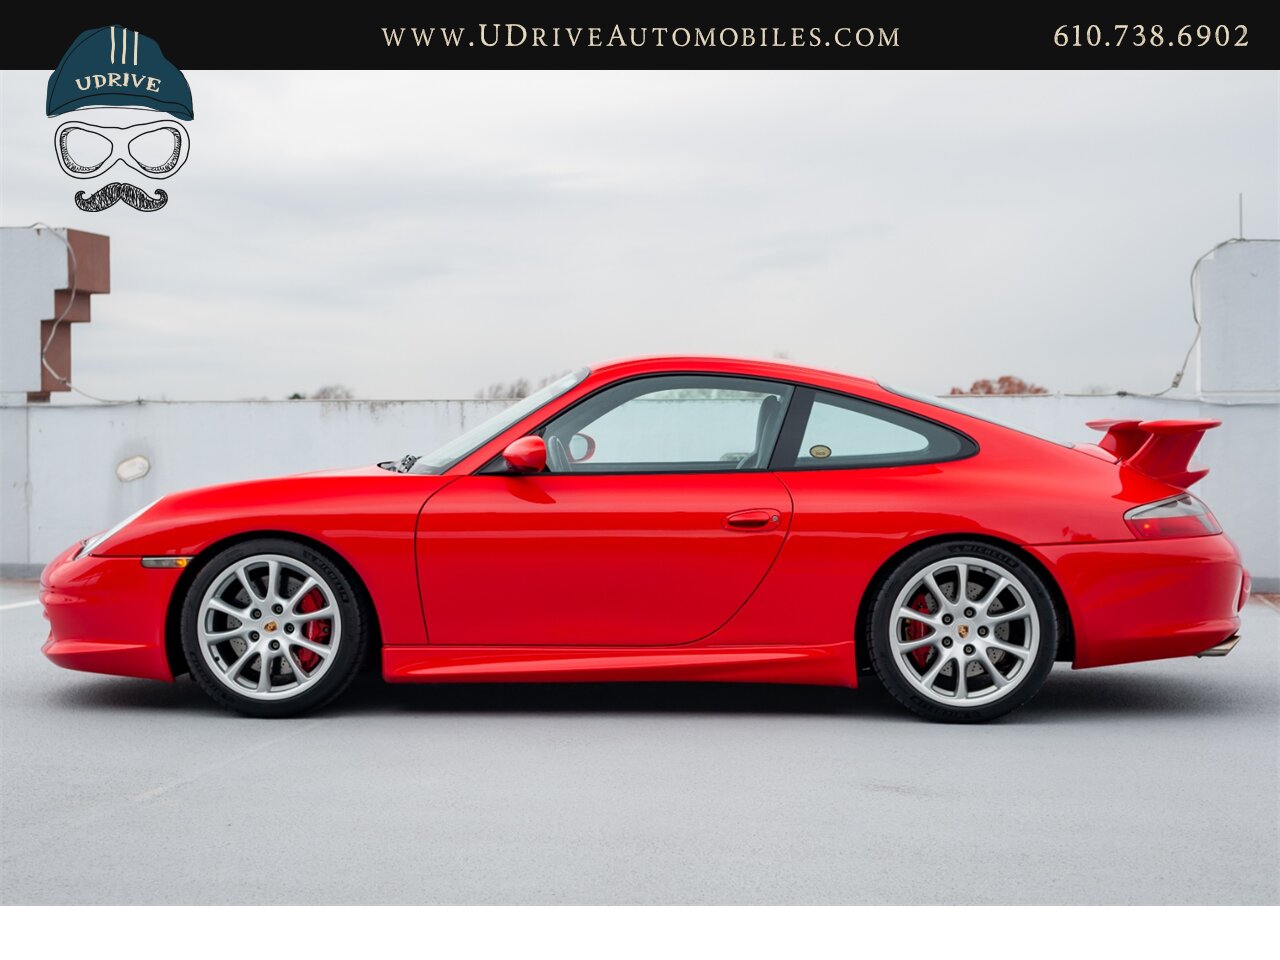 2004 Porsche 911 996 GT3 Guards Red Sport Seats Painted Hardbacks  Painted Center Console 18k Miles - Photo 9 - West Chester, PA 19382